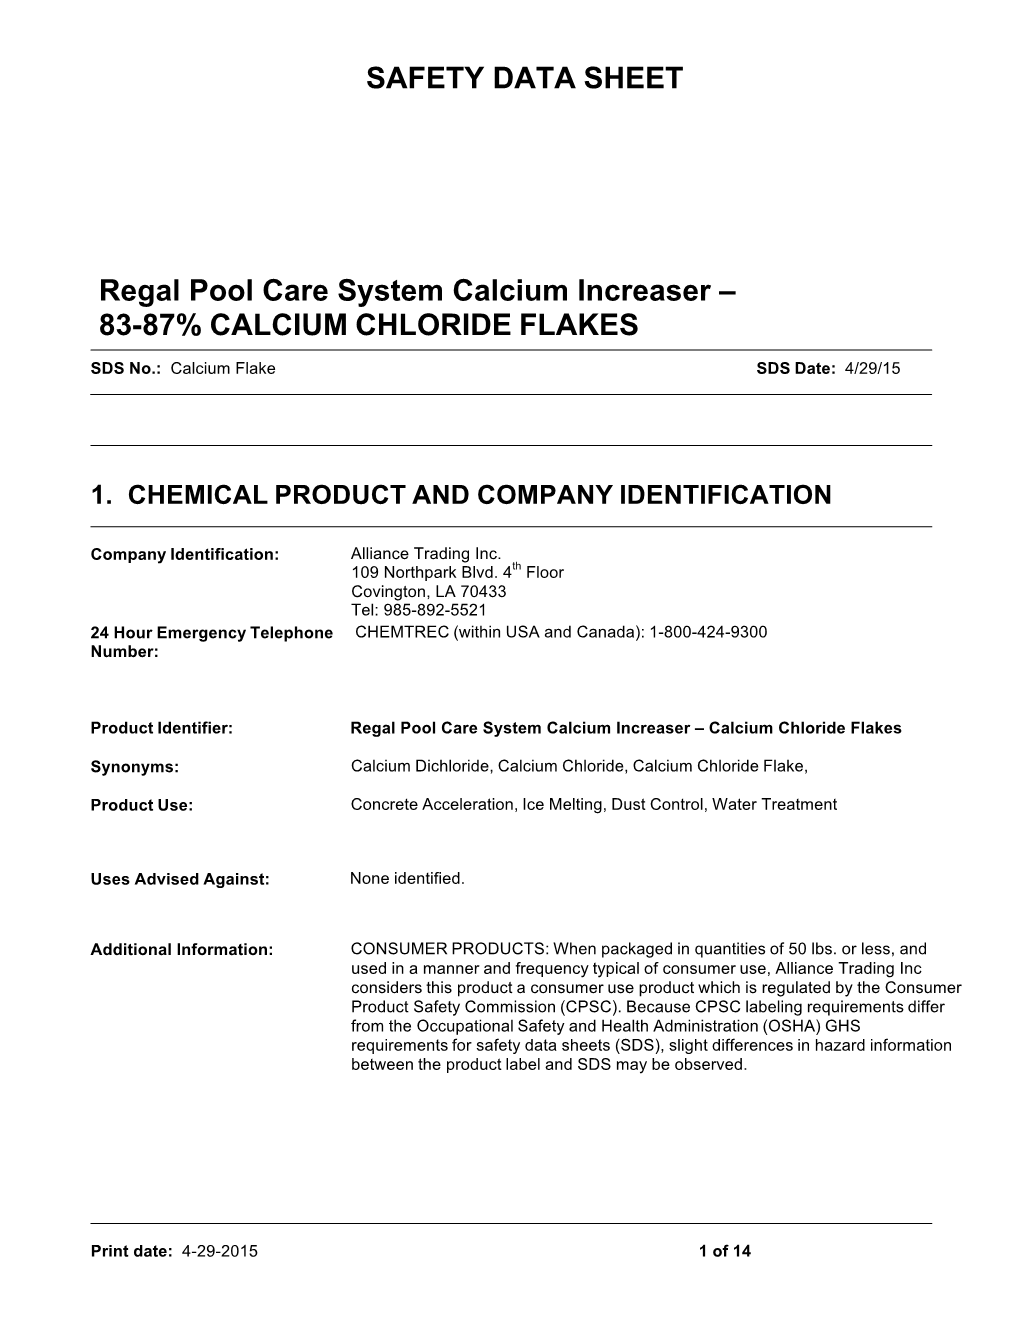 SAFETY DATA SHEET Regal Pool Care System Calcium Increaser